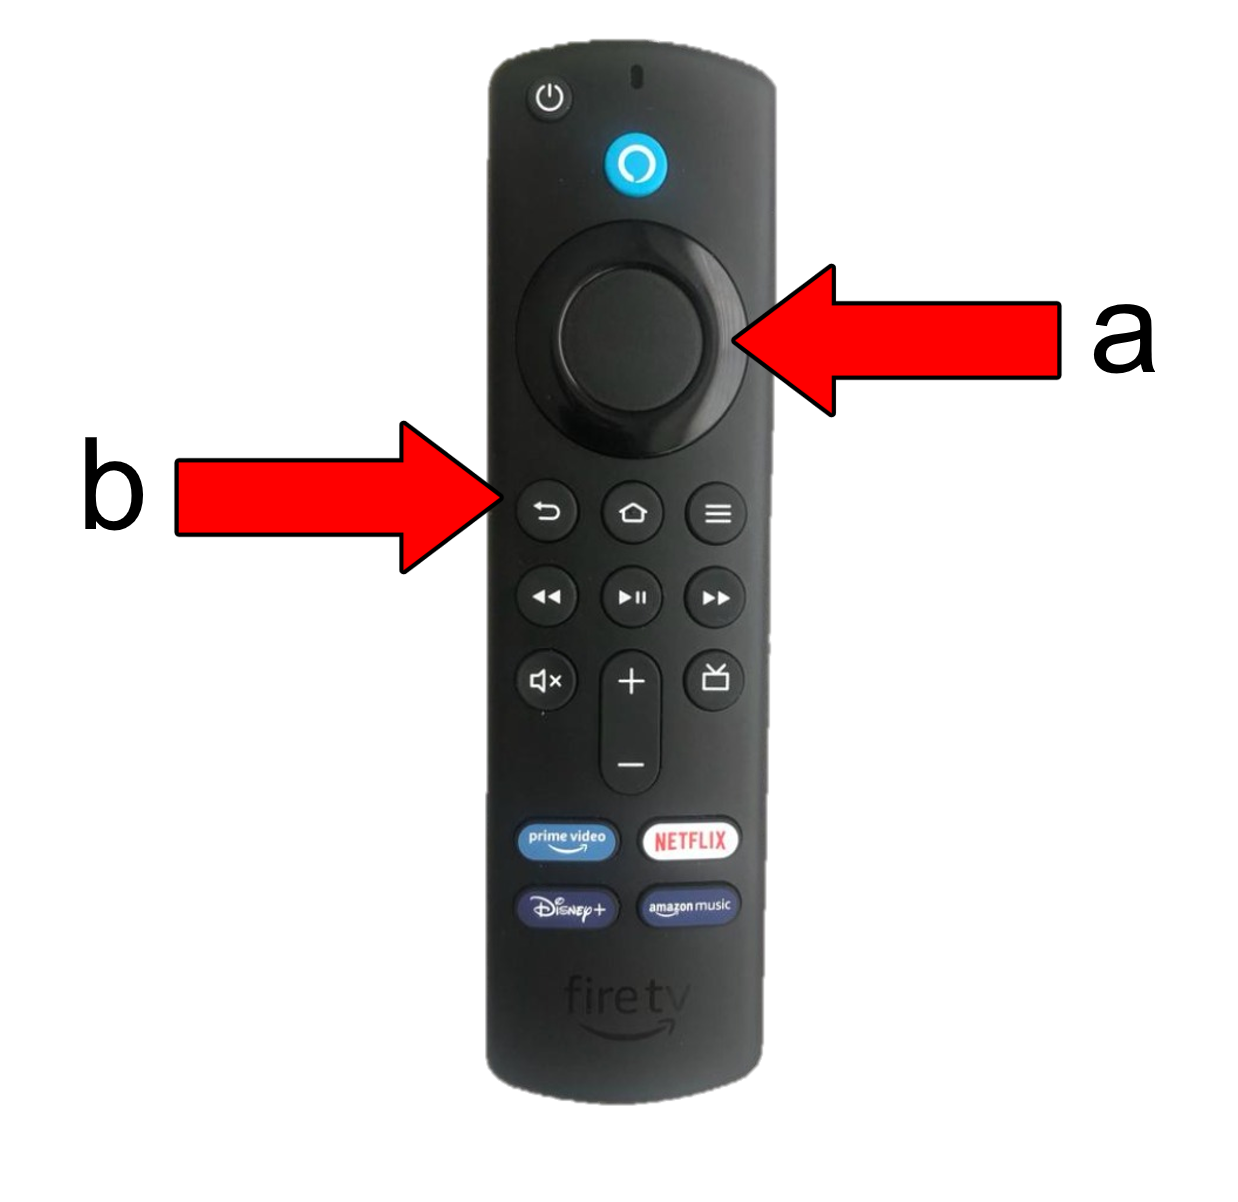 How to factory reset an Amazon Firestick with the controller